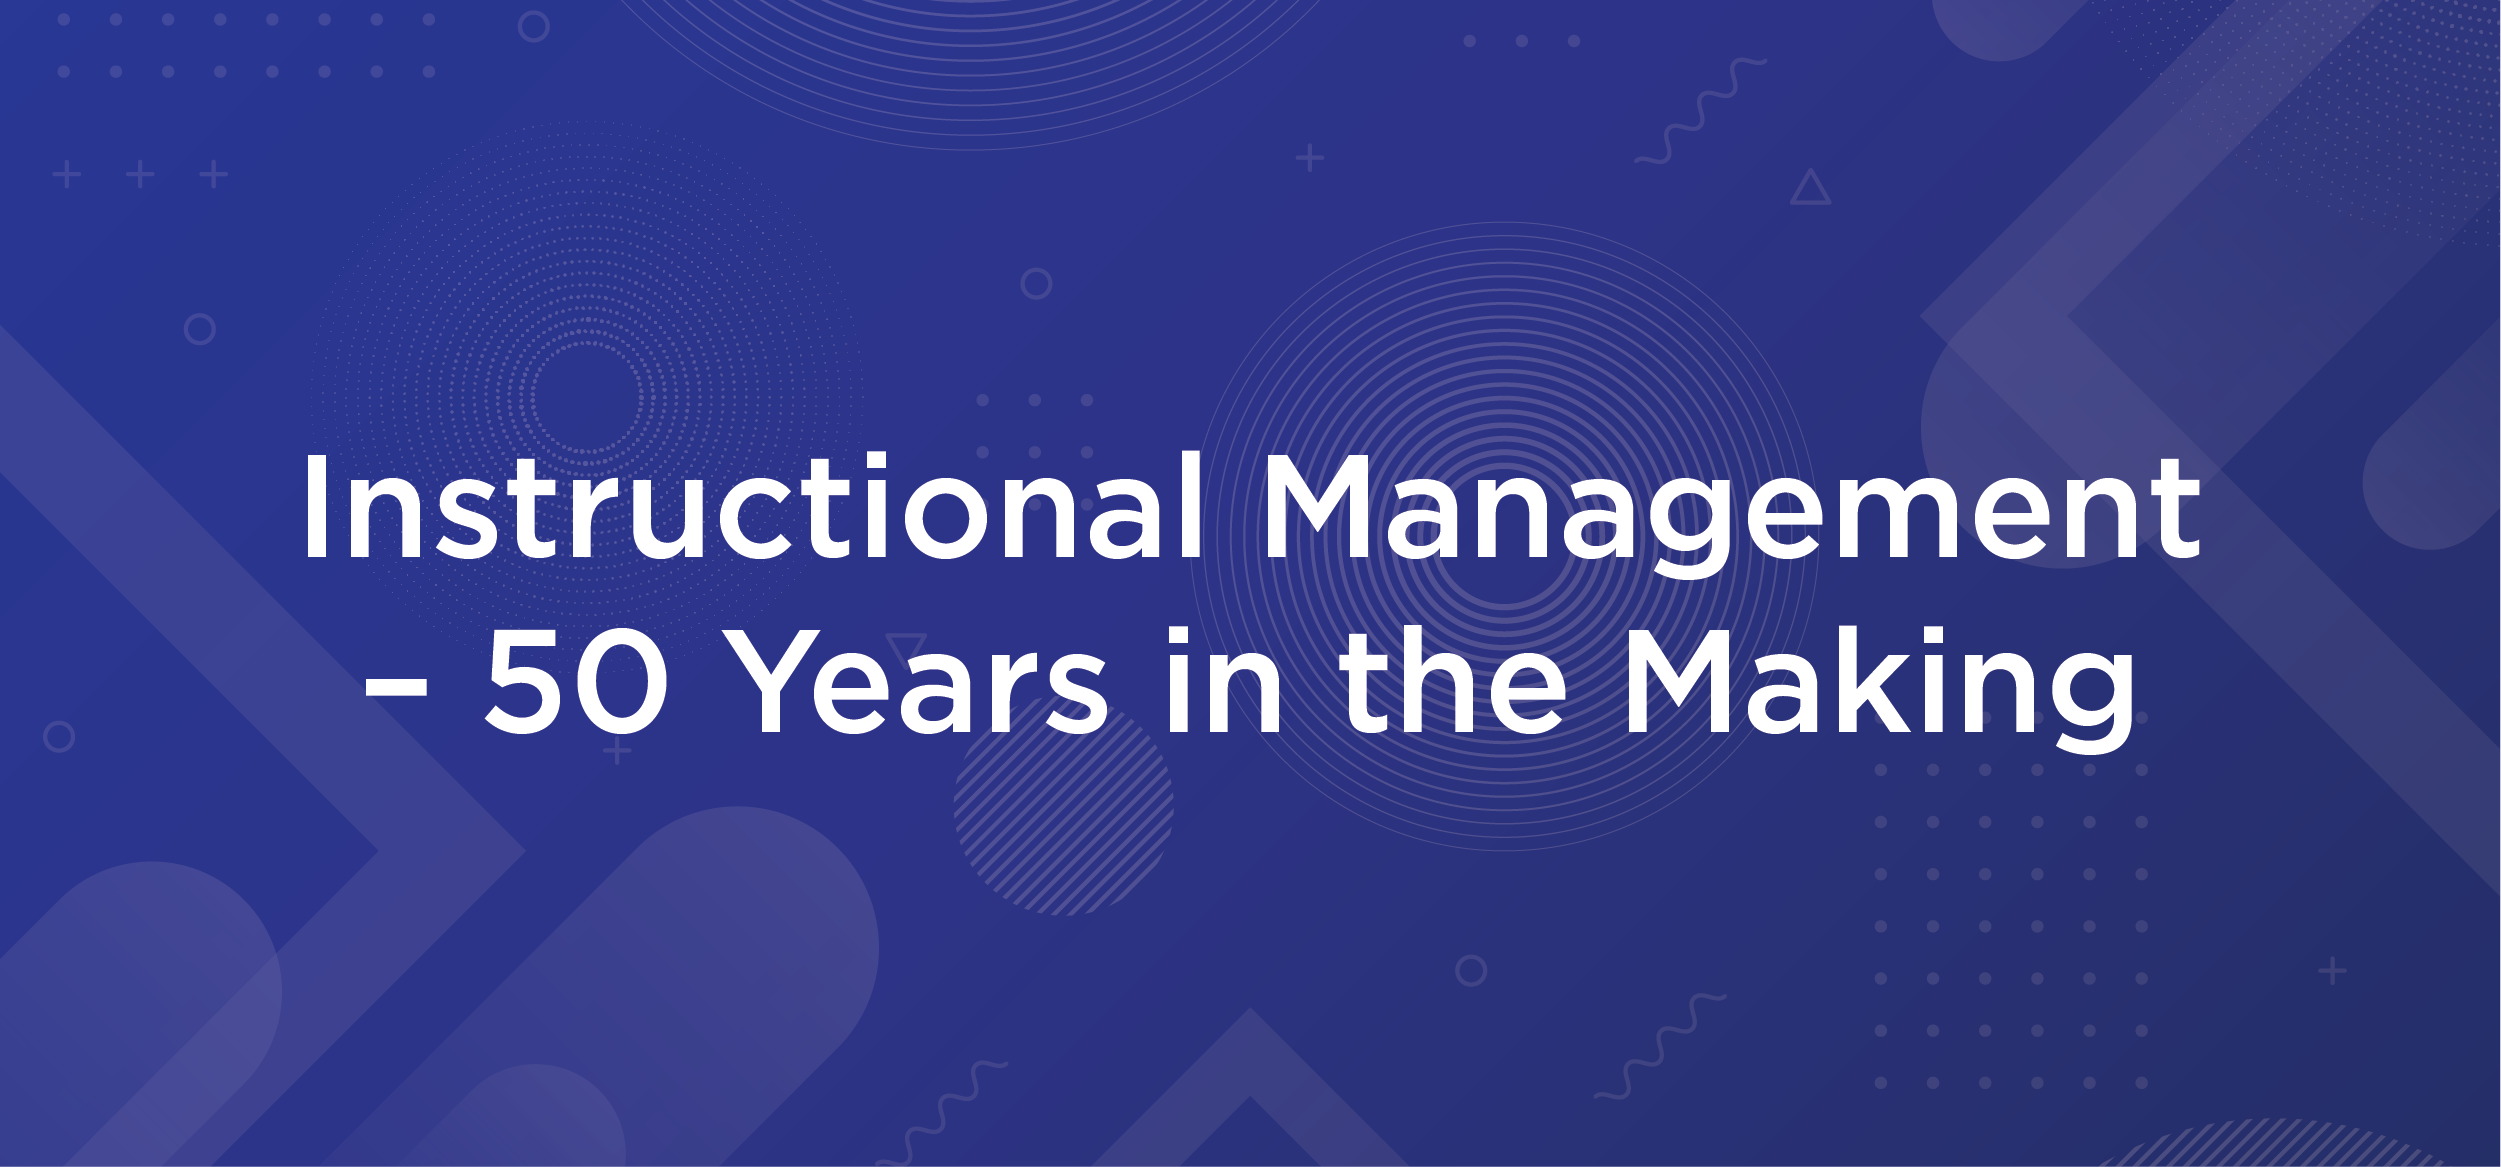 Instructional Management – 50 Years in the Making